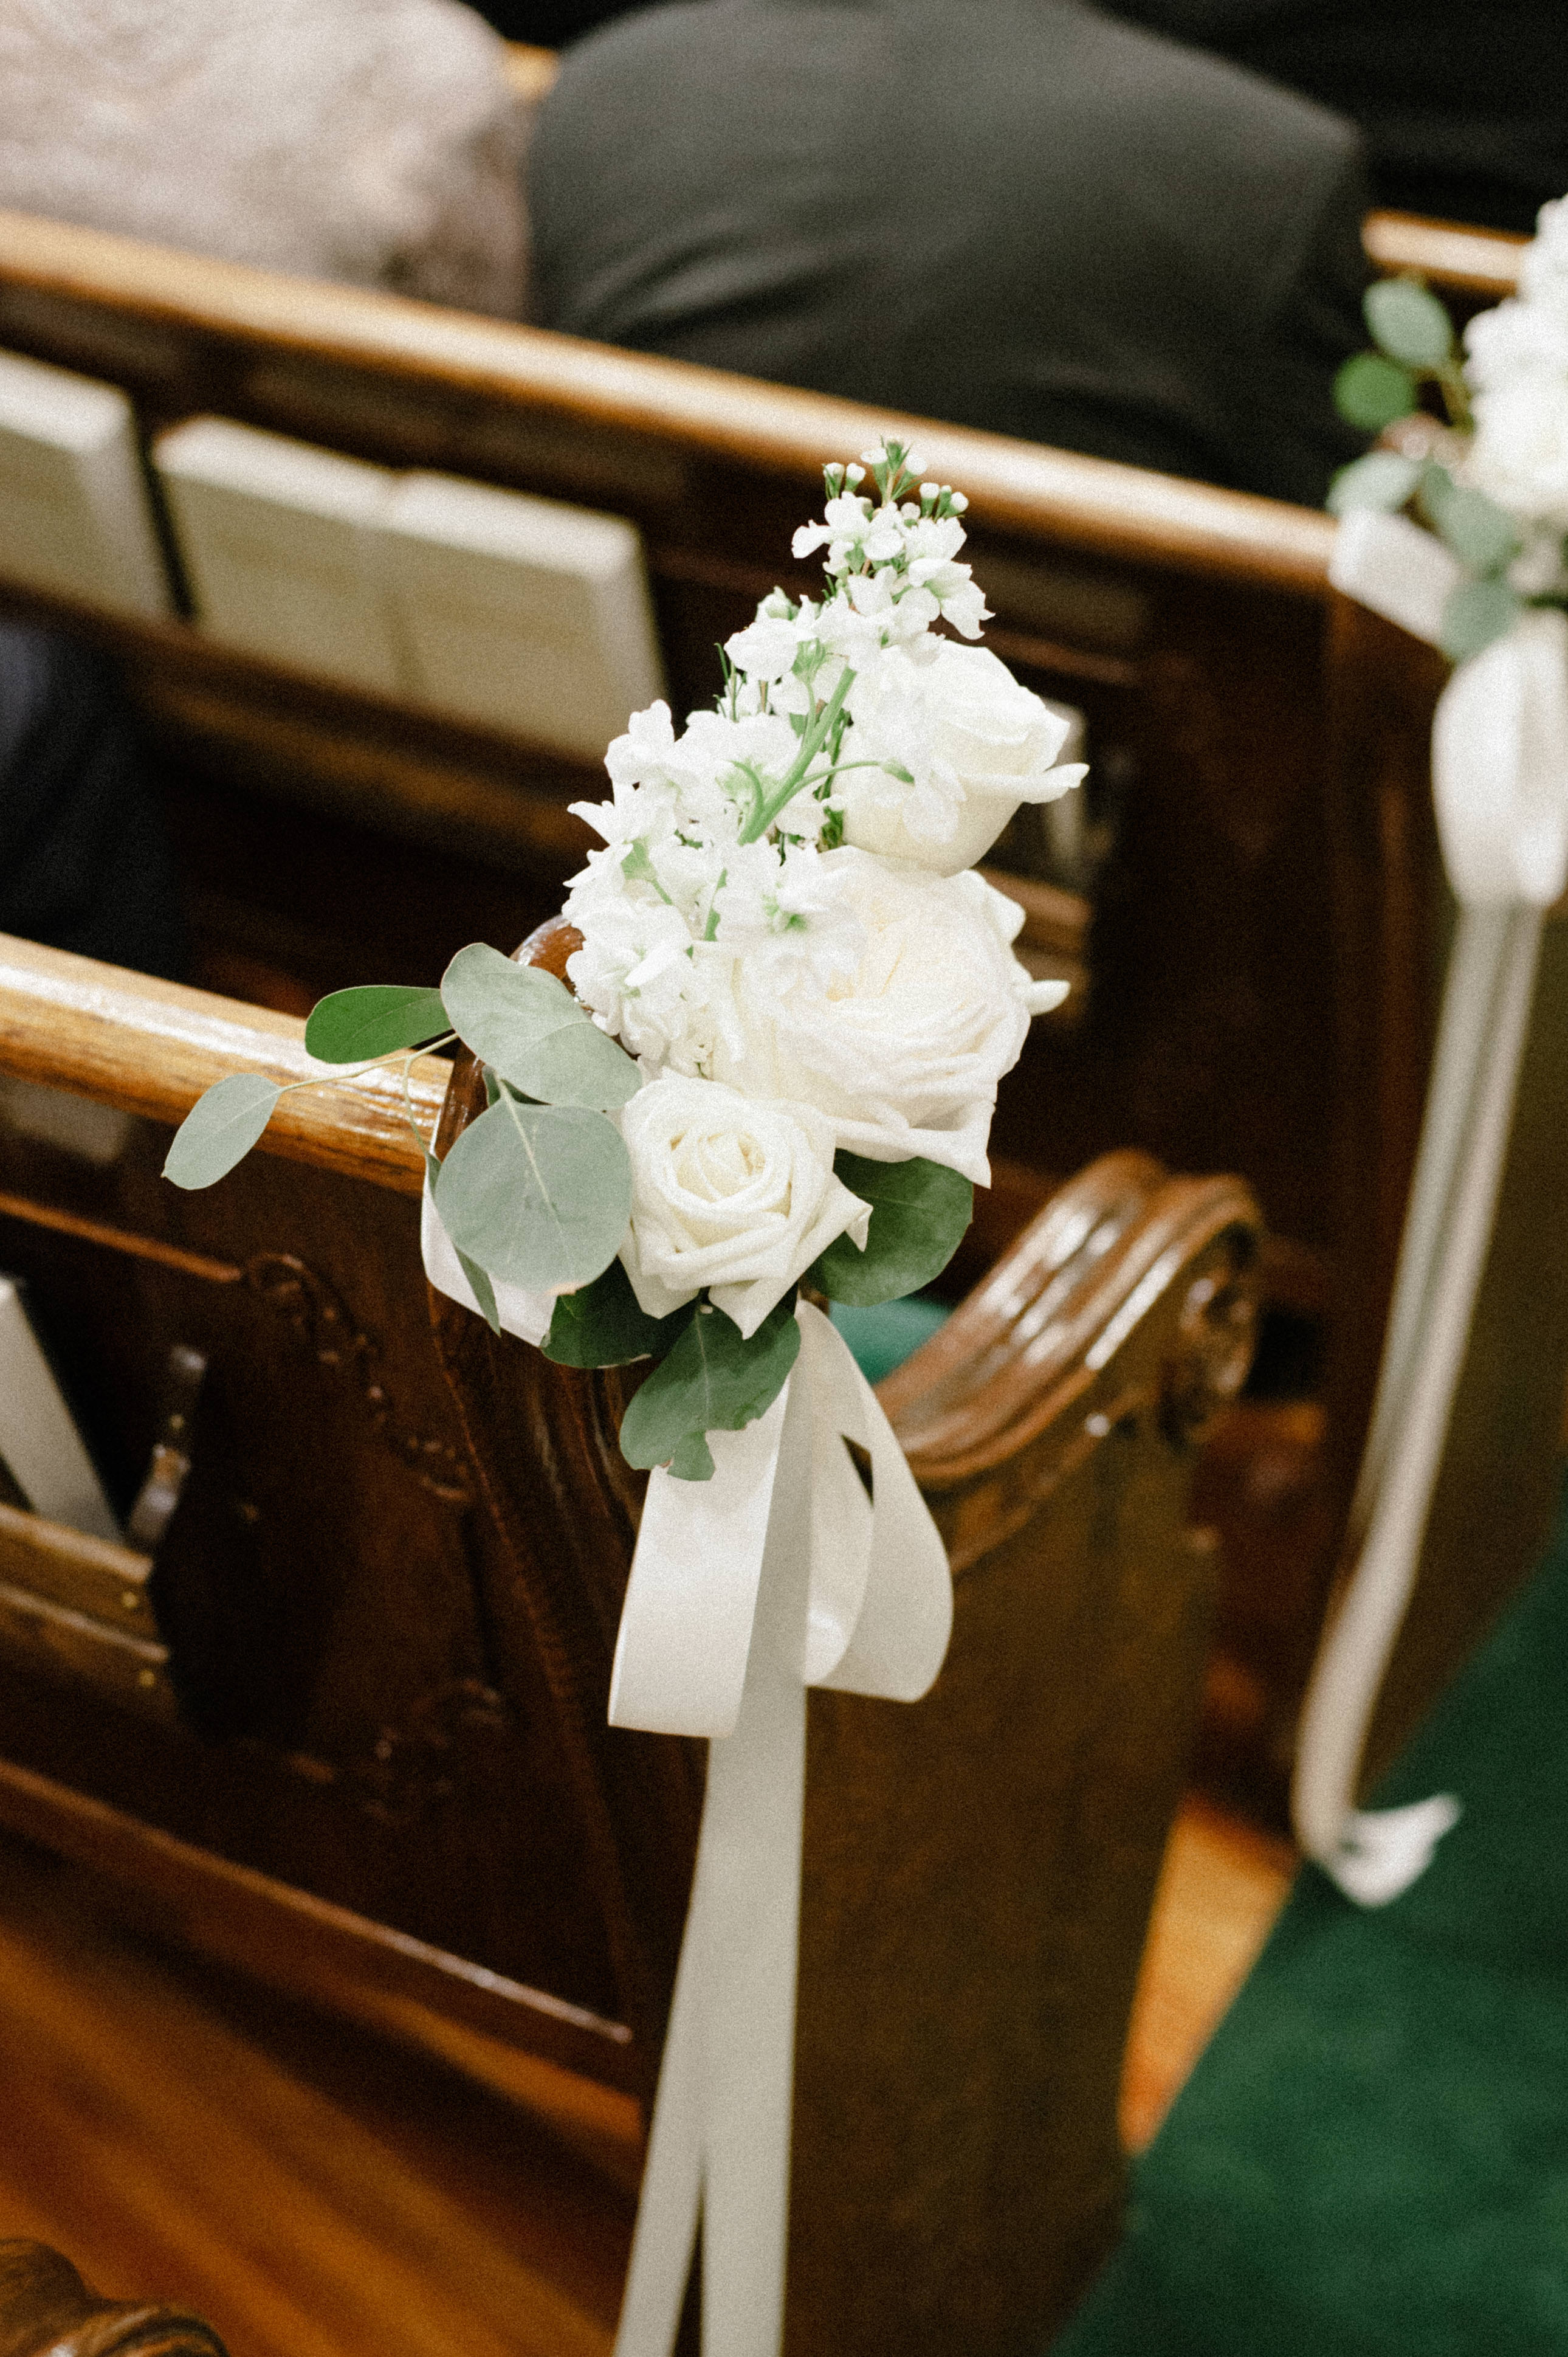 A photo of filmy Portra 400 edit of indoor floral arrangement in tradition church pew at First Baptist Church in Selma, AL